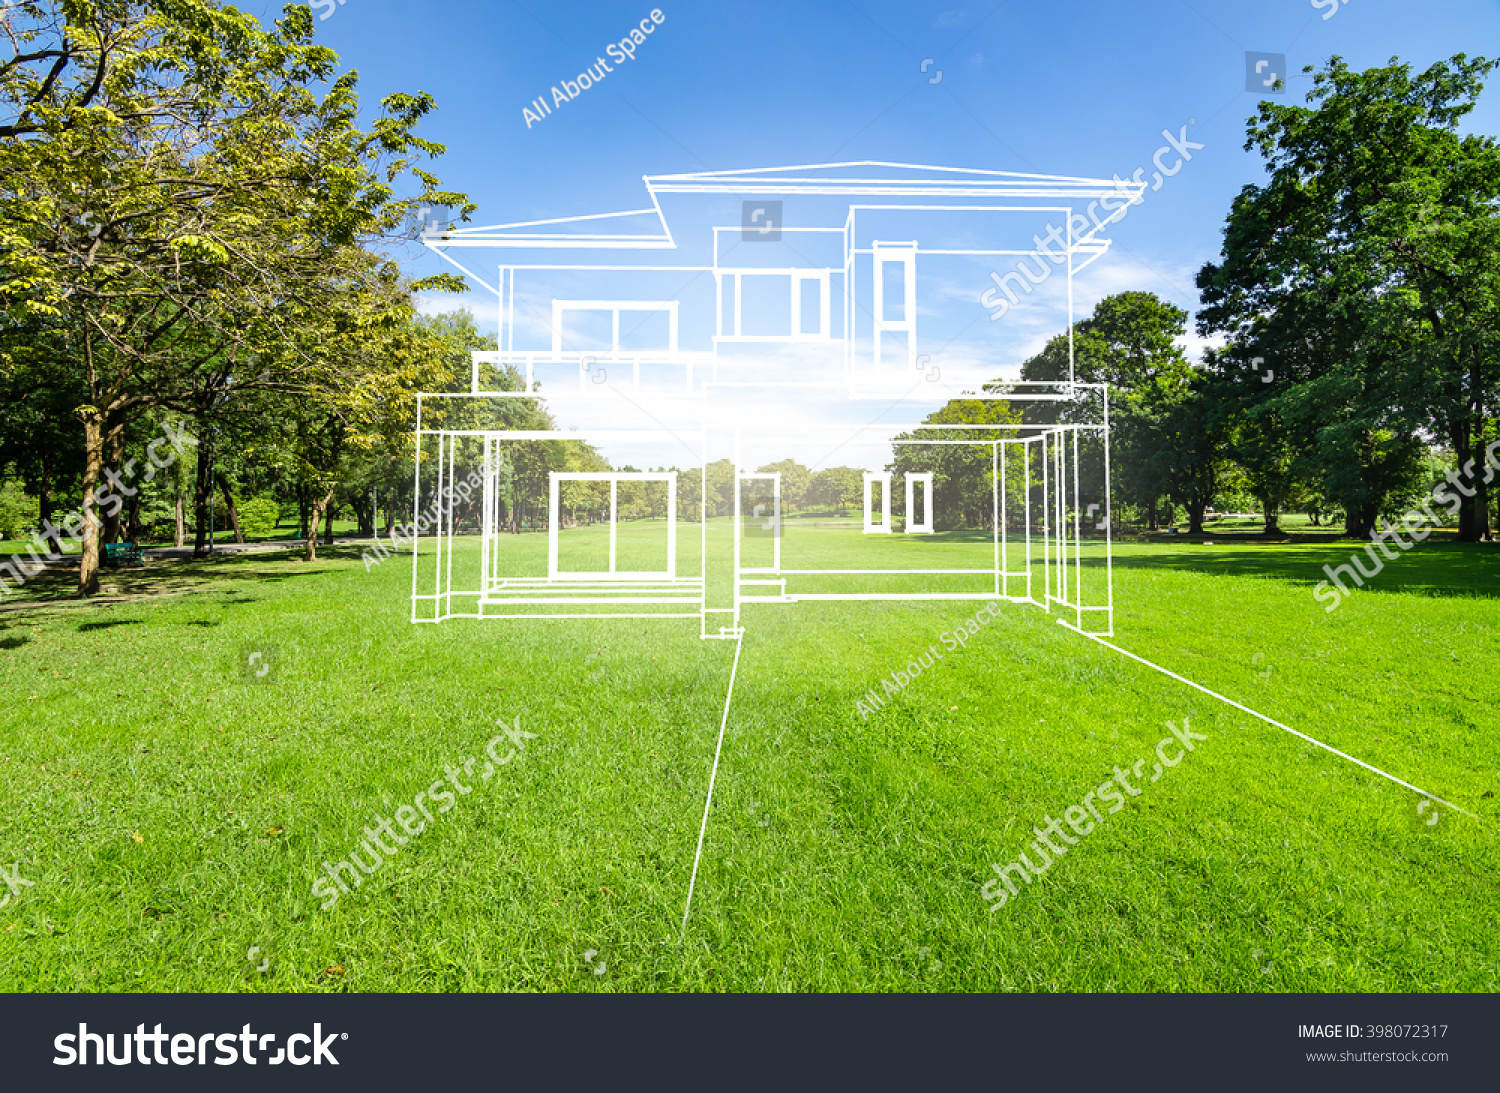 concept of dream house on green grass filed #398072317